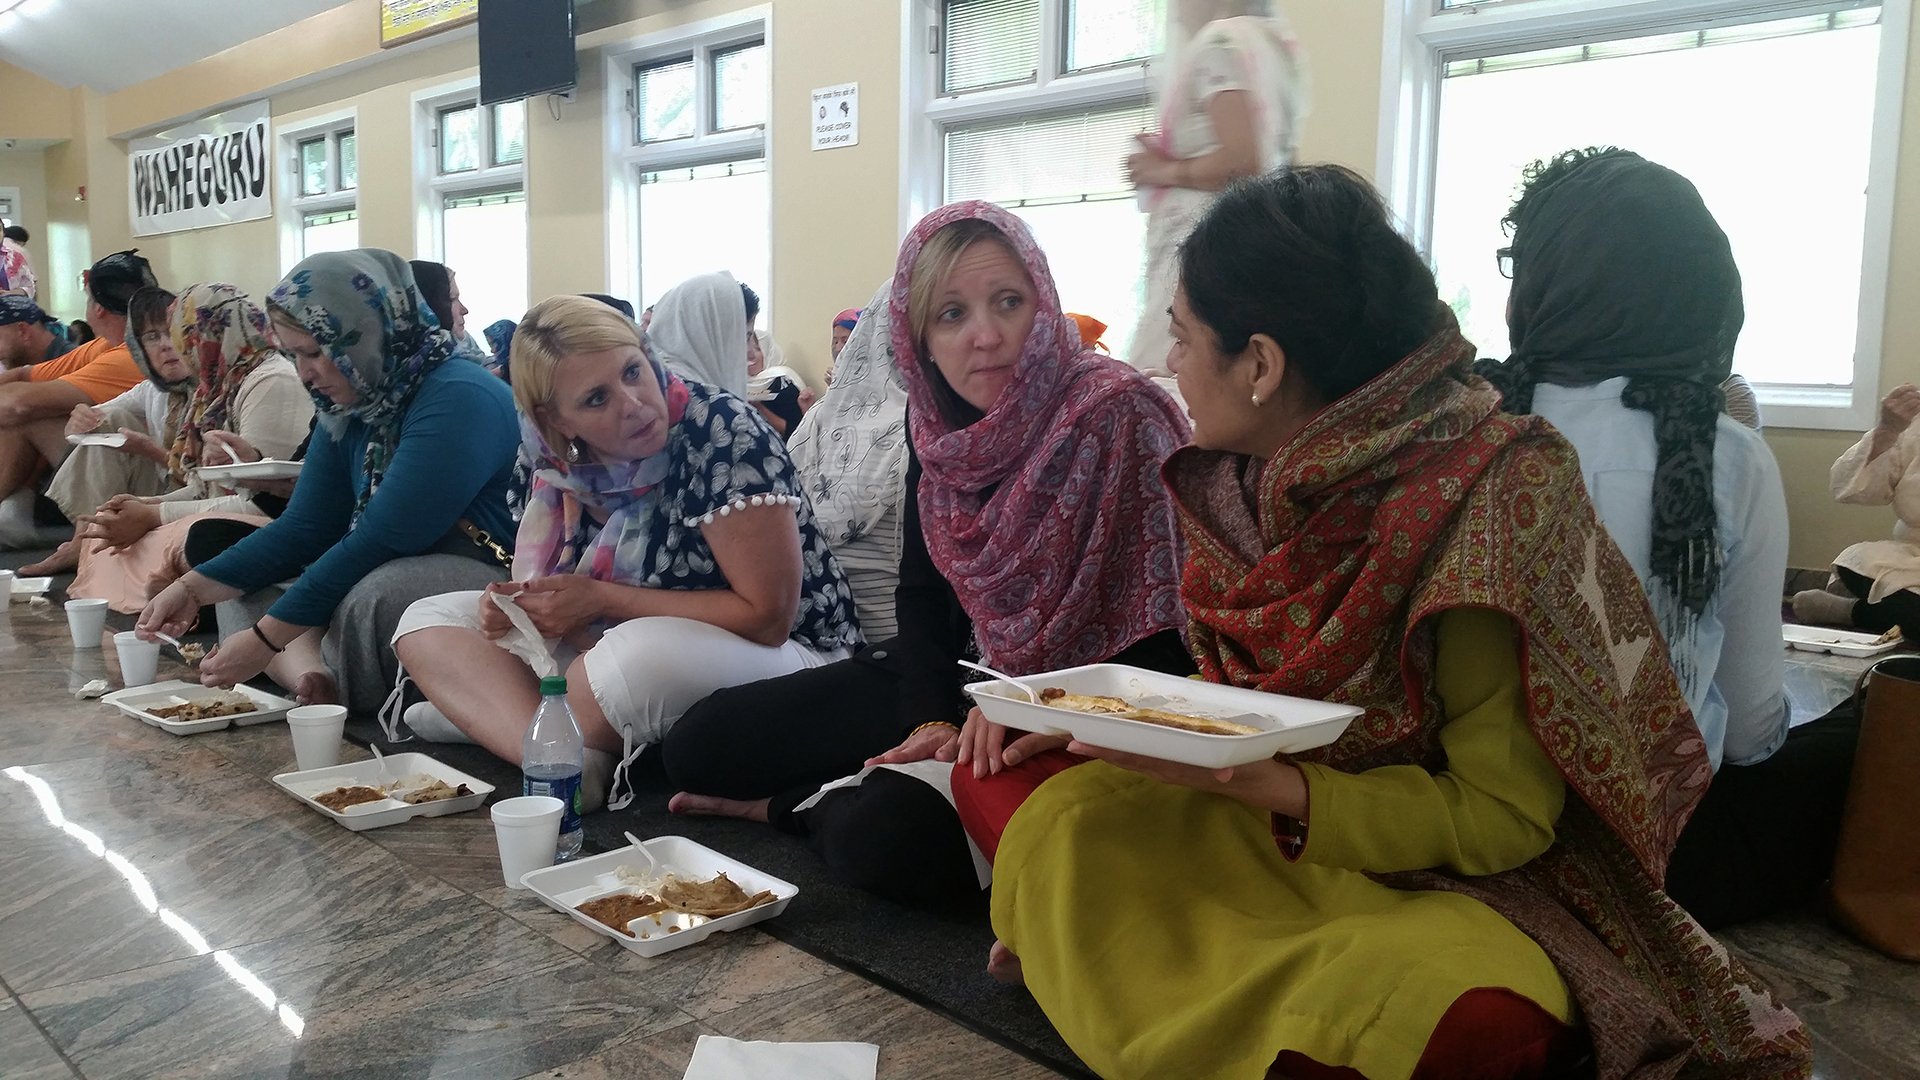 Suburban Chicago public school teachers take in the traditional “langer” meal Tuesday at the Sikh Gurdwara in Palatine. (Matt Masterson / Chicago Tonight)